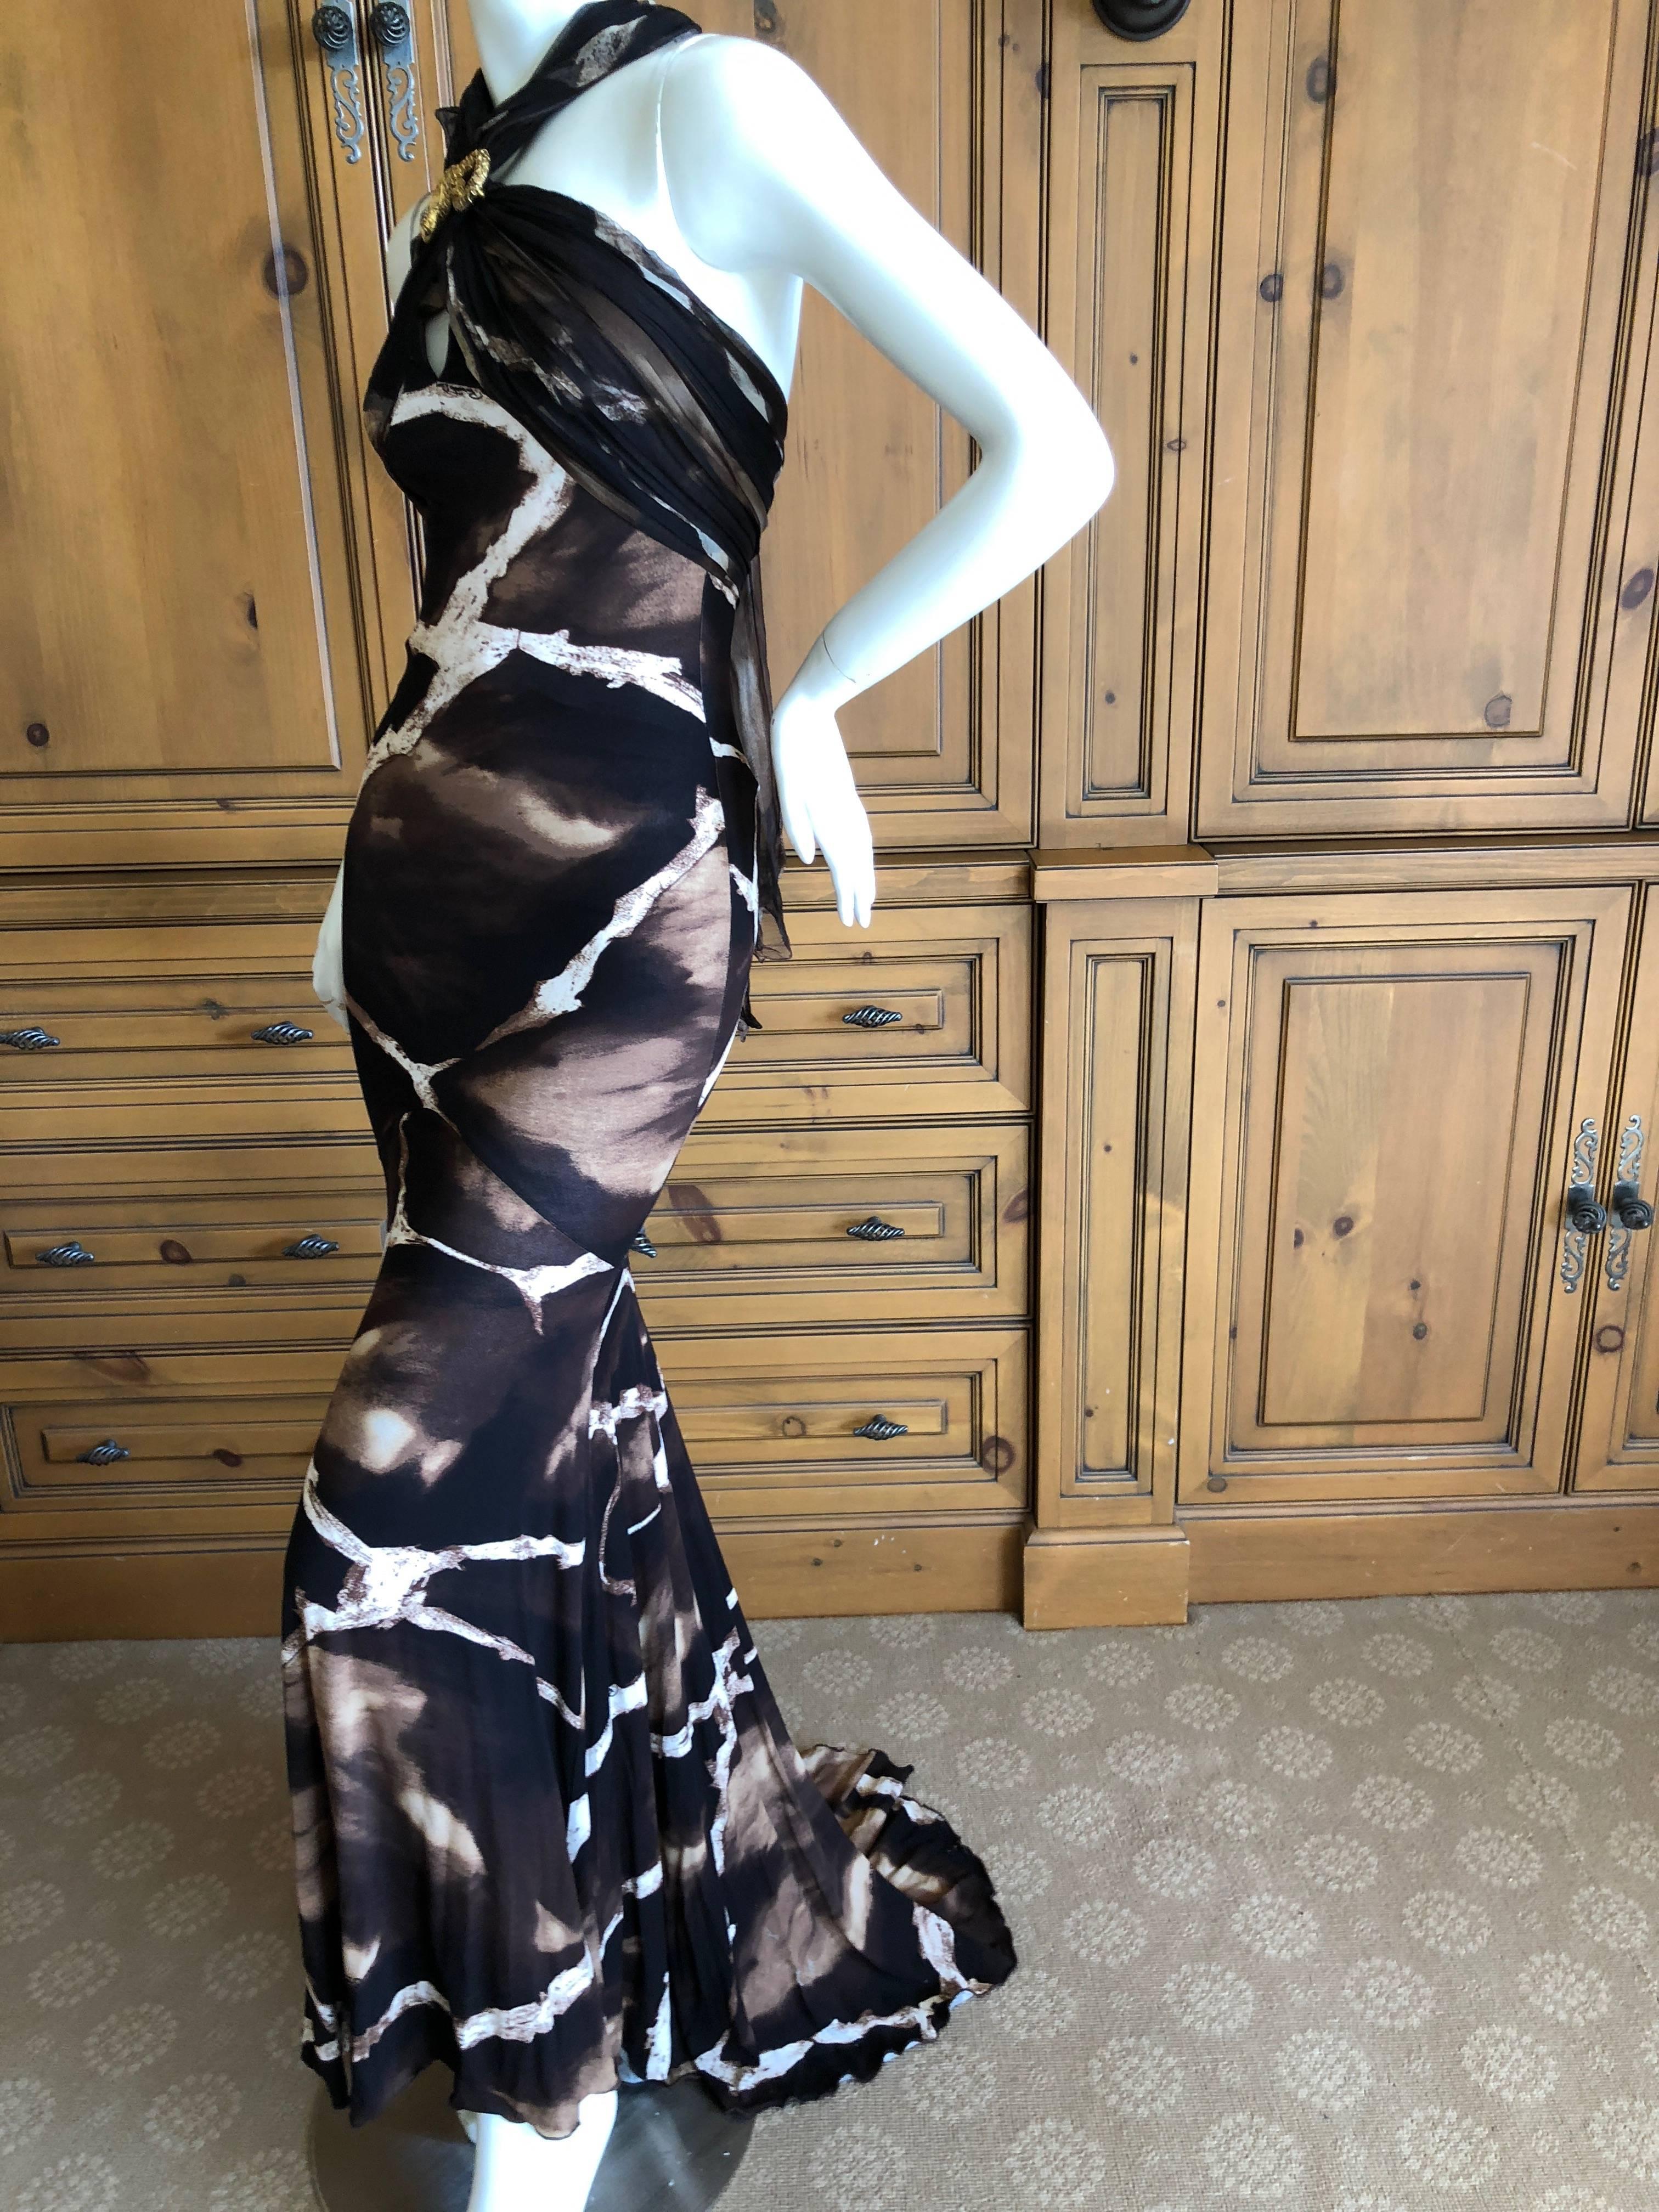 Roberto Cavalli Vintage 1980's Animal Print Evening Dress with Train and Scarf.
Comes with a long matching infinity scarf.
This is so pretty, and features an inner bodysuit, see photo, with train.
Bust  35